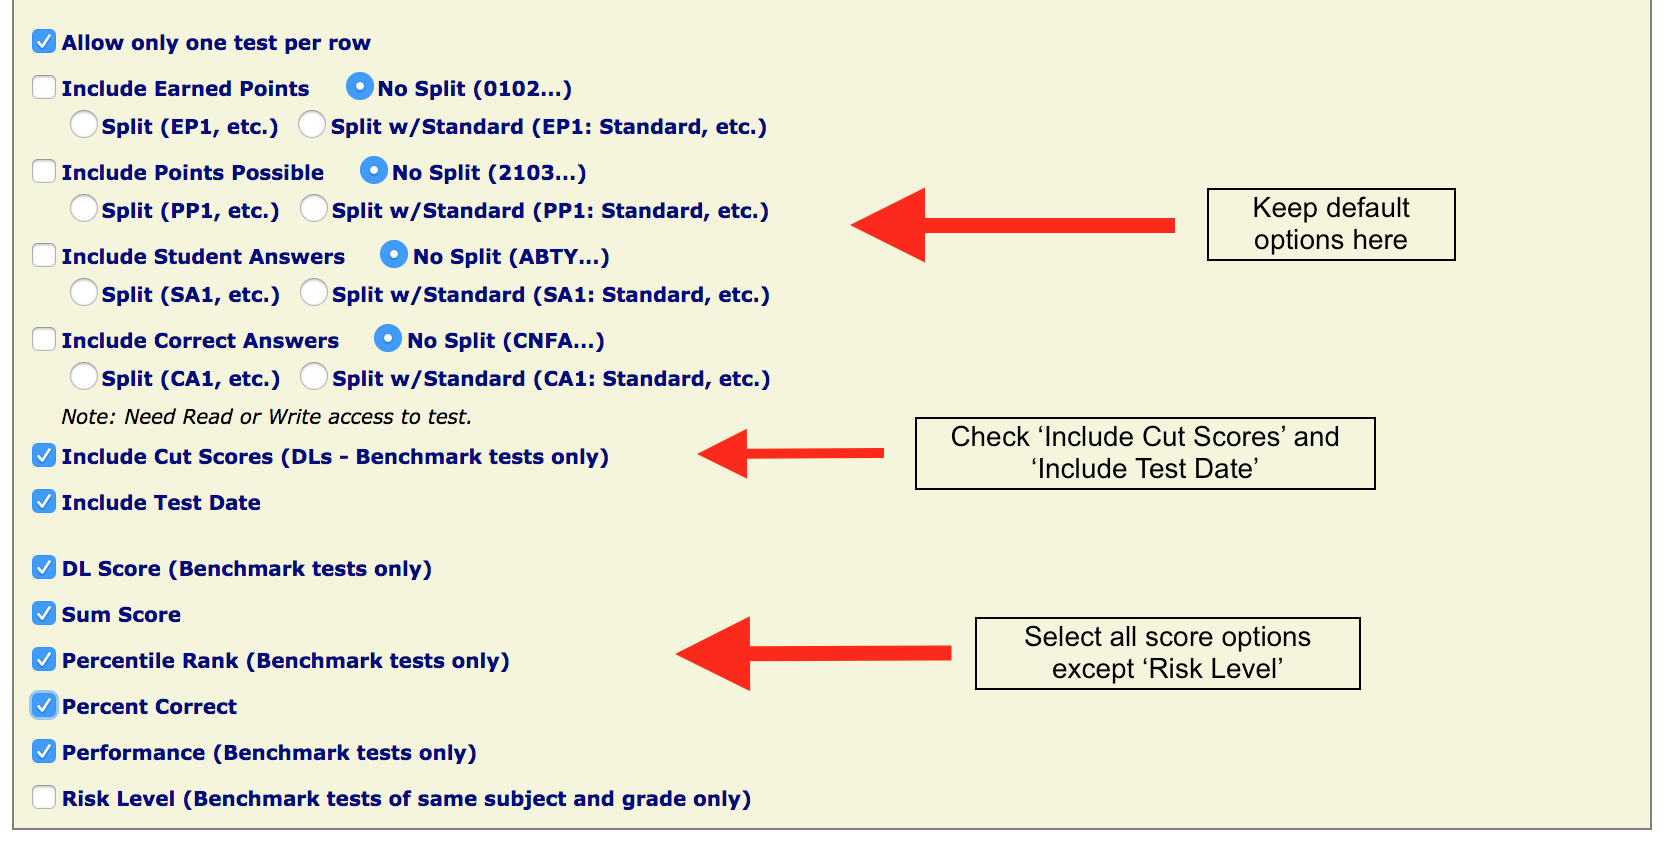 the score options - keep the default options for the points options, student answers, and correct answers, check Include Cut Scores and Include Test Date, and select all score options except Risk Level